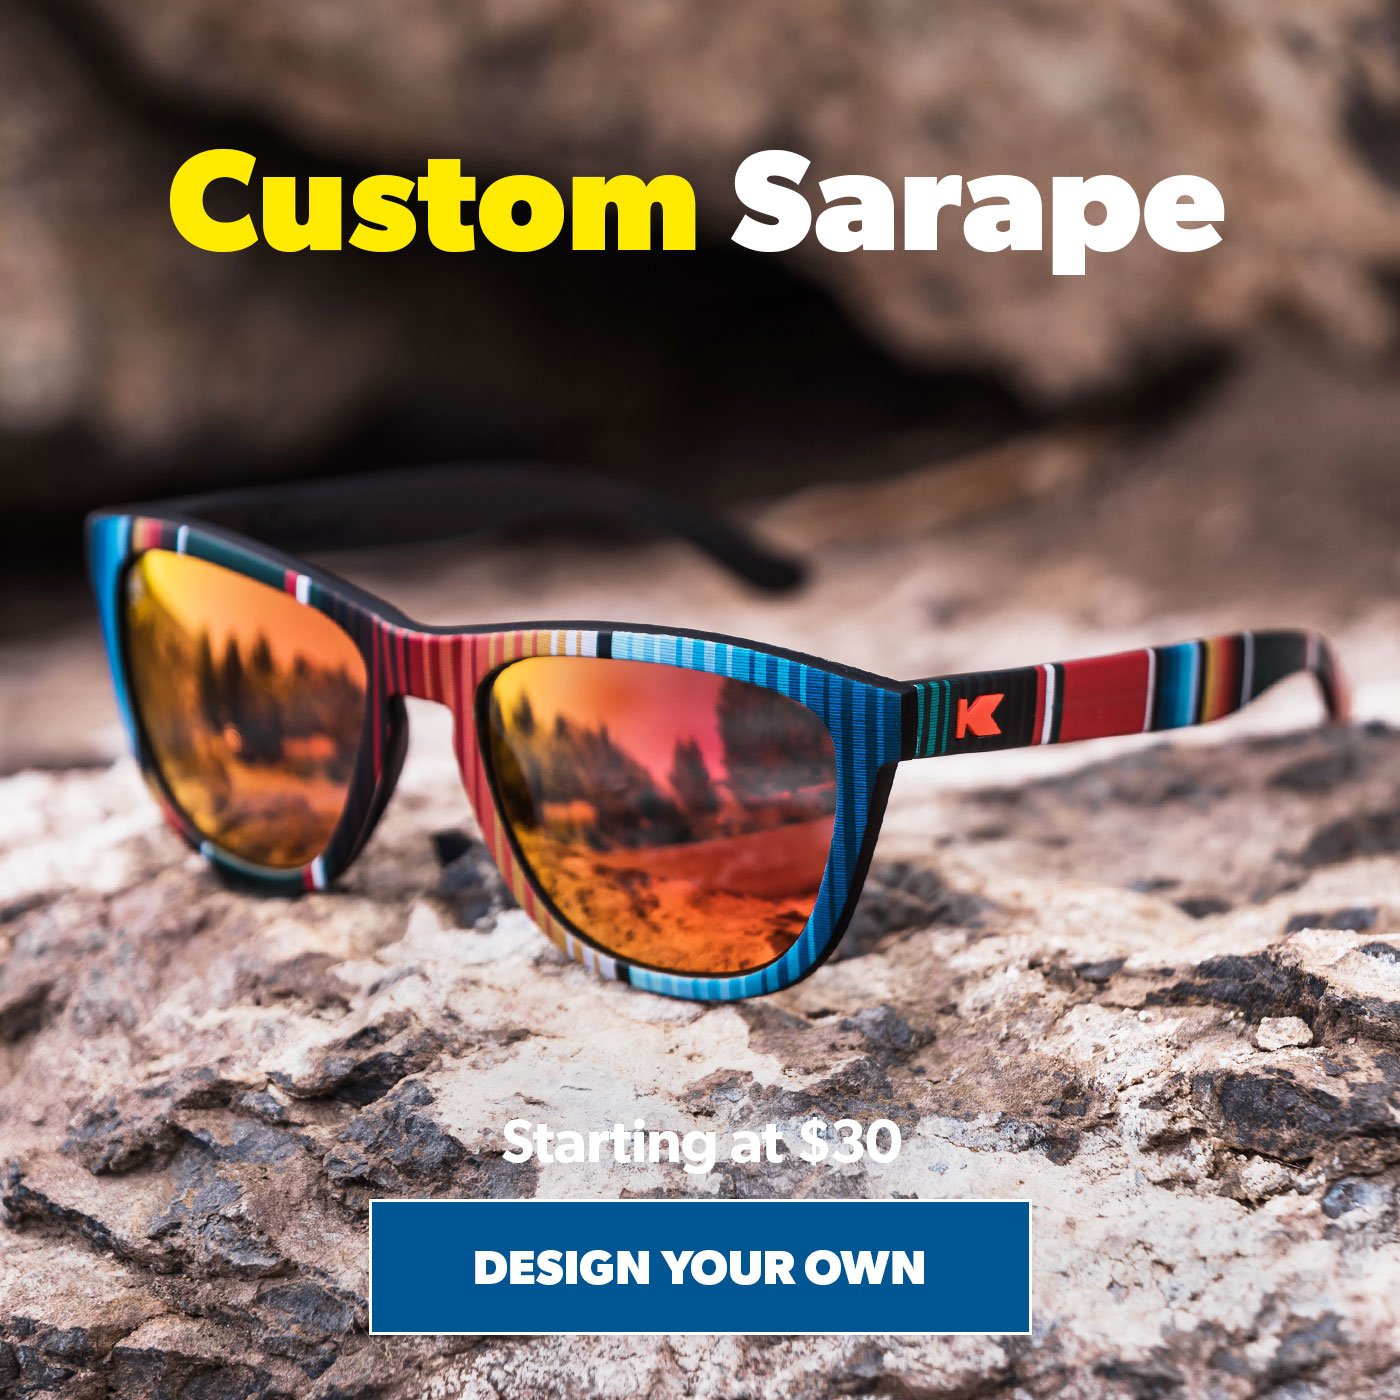 Prescription sunglasses: How to customize yours | Clearly CA